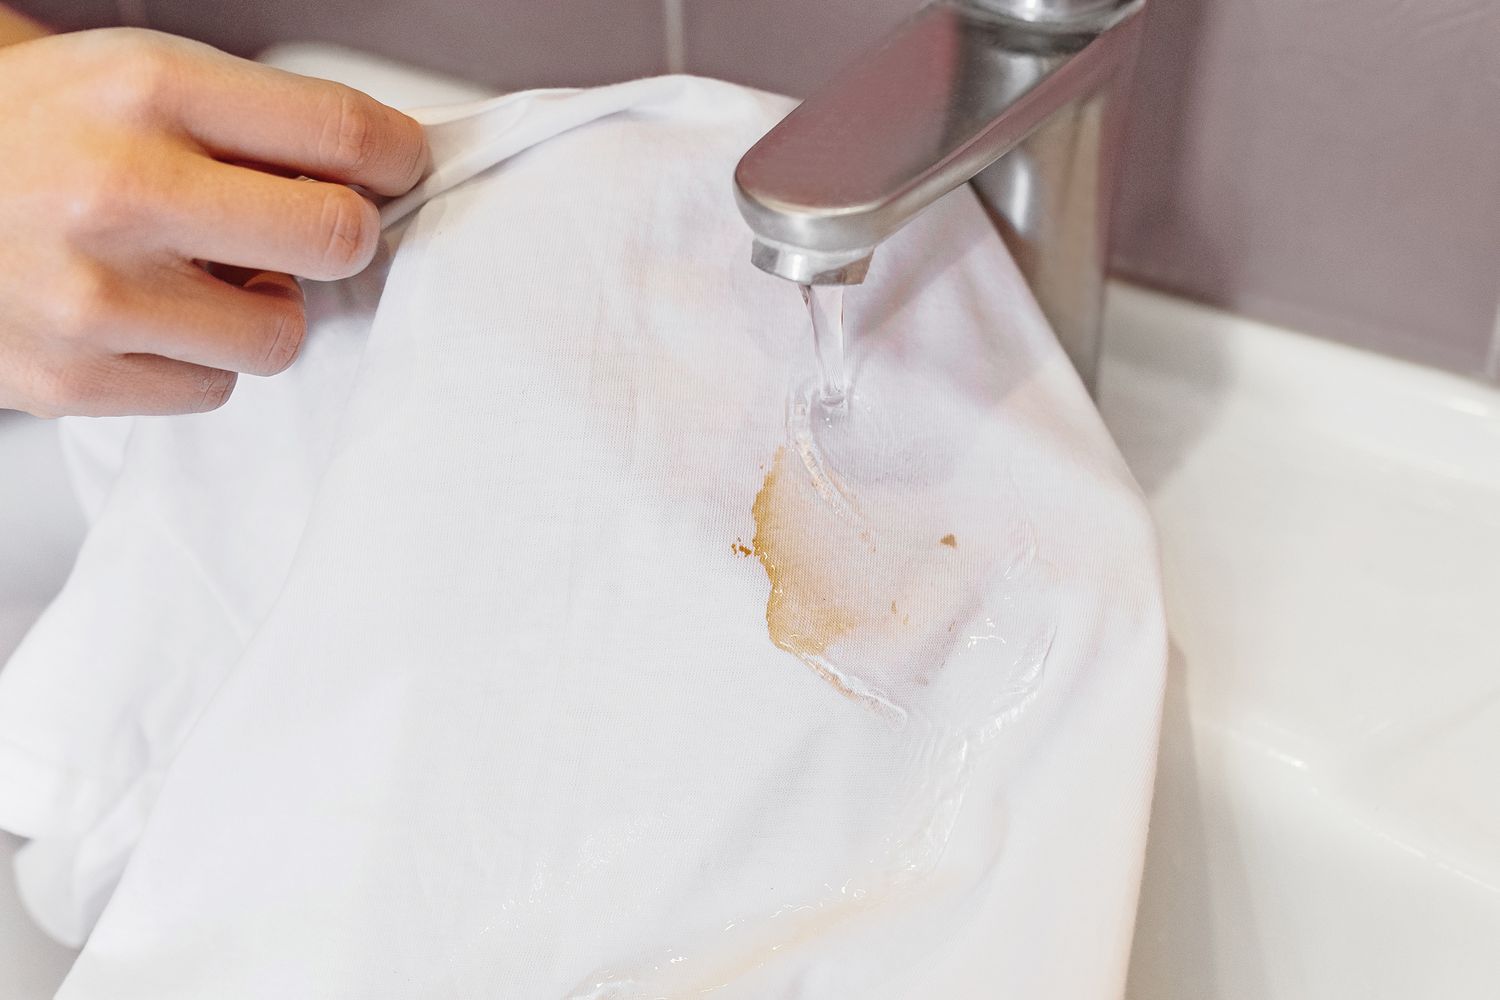 Soy sauce stained shirt rinsed under running cold water